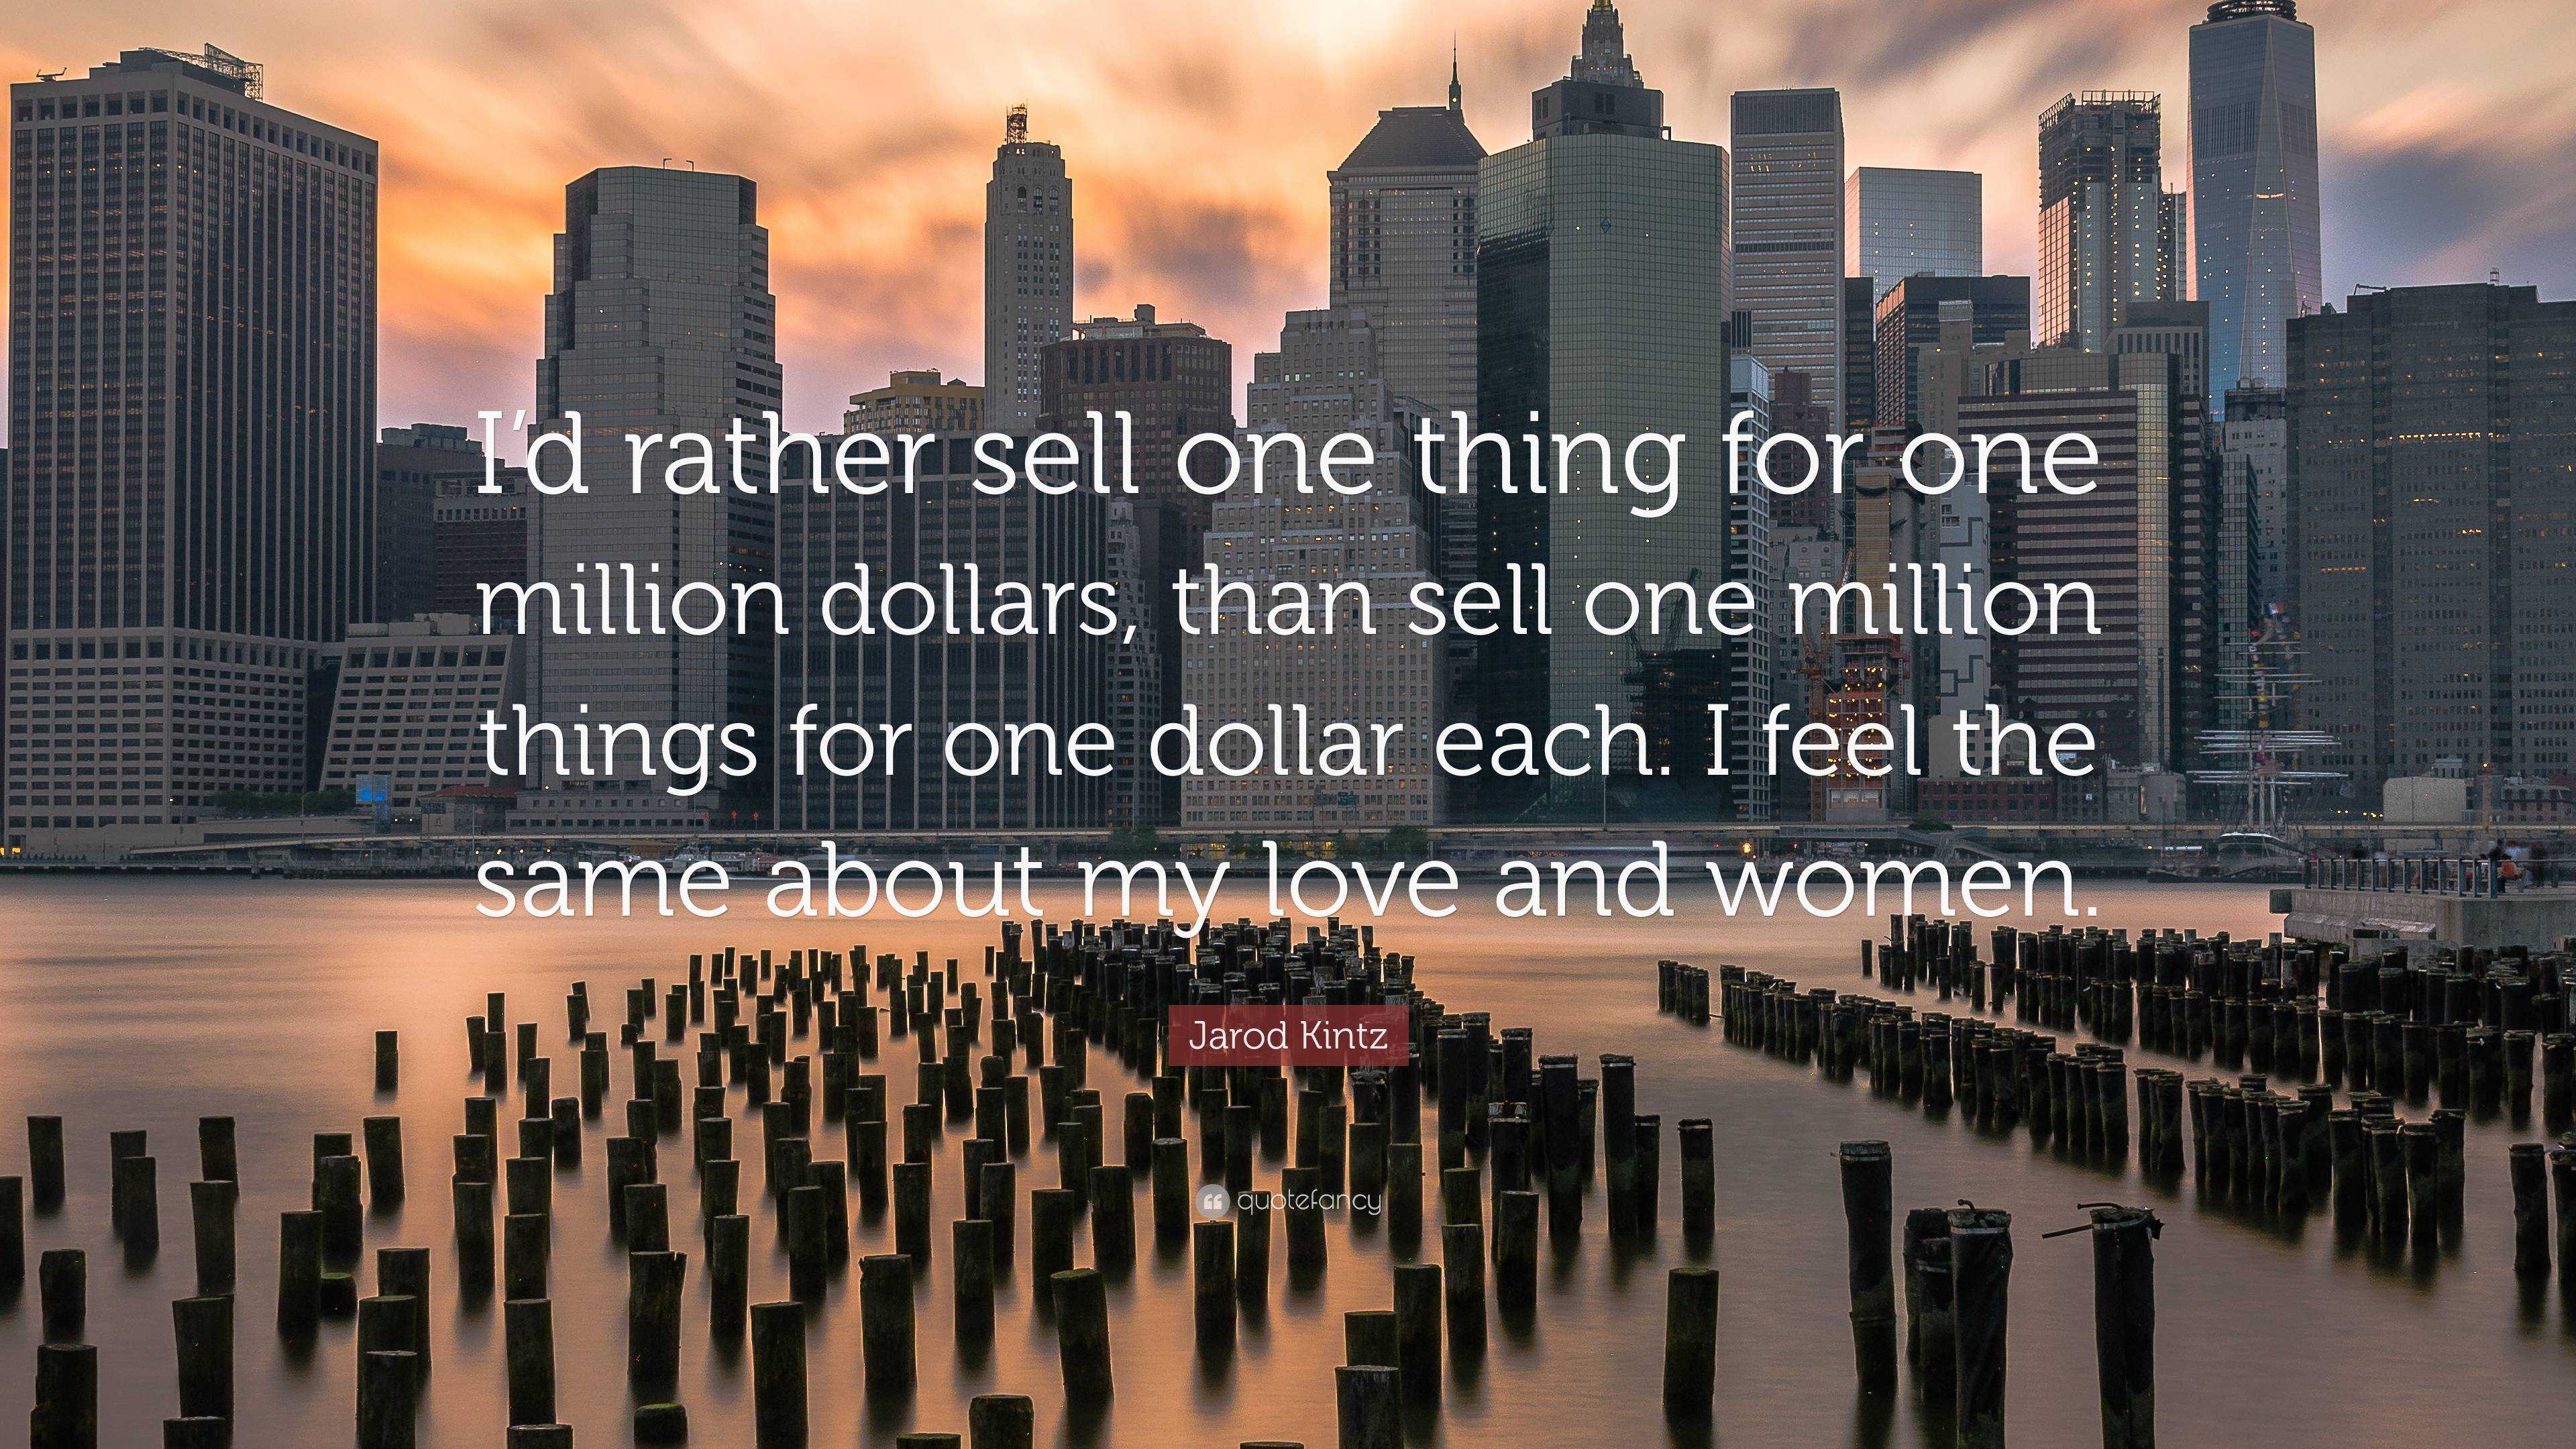 https://quotefancy.com/media/wallpaper/3840x2160/6387956-Jarod-Kintz-Quote-I-d-rather-sell-one-thing-for-one-million.jpg